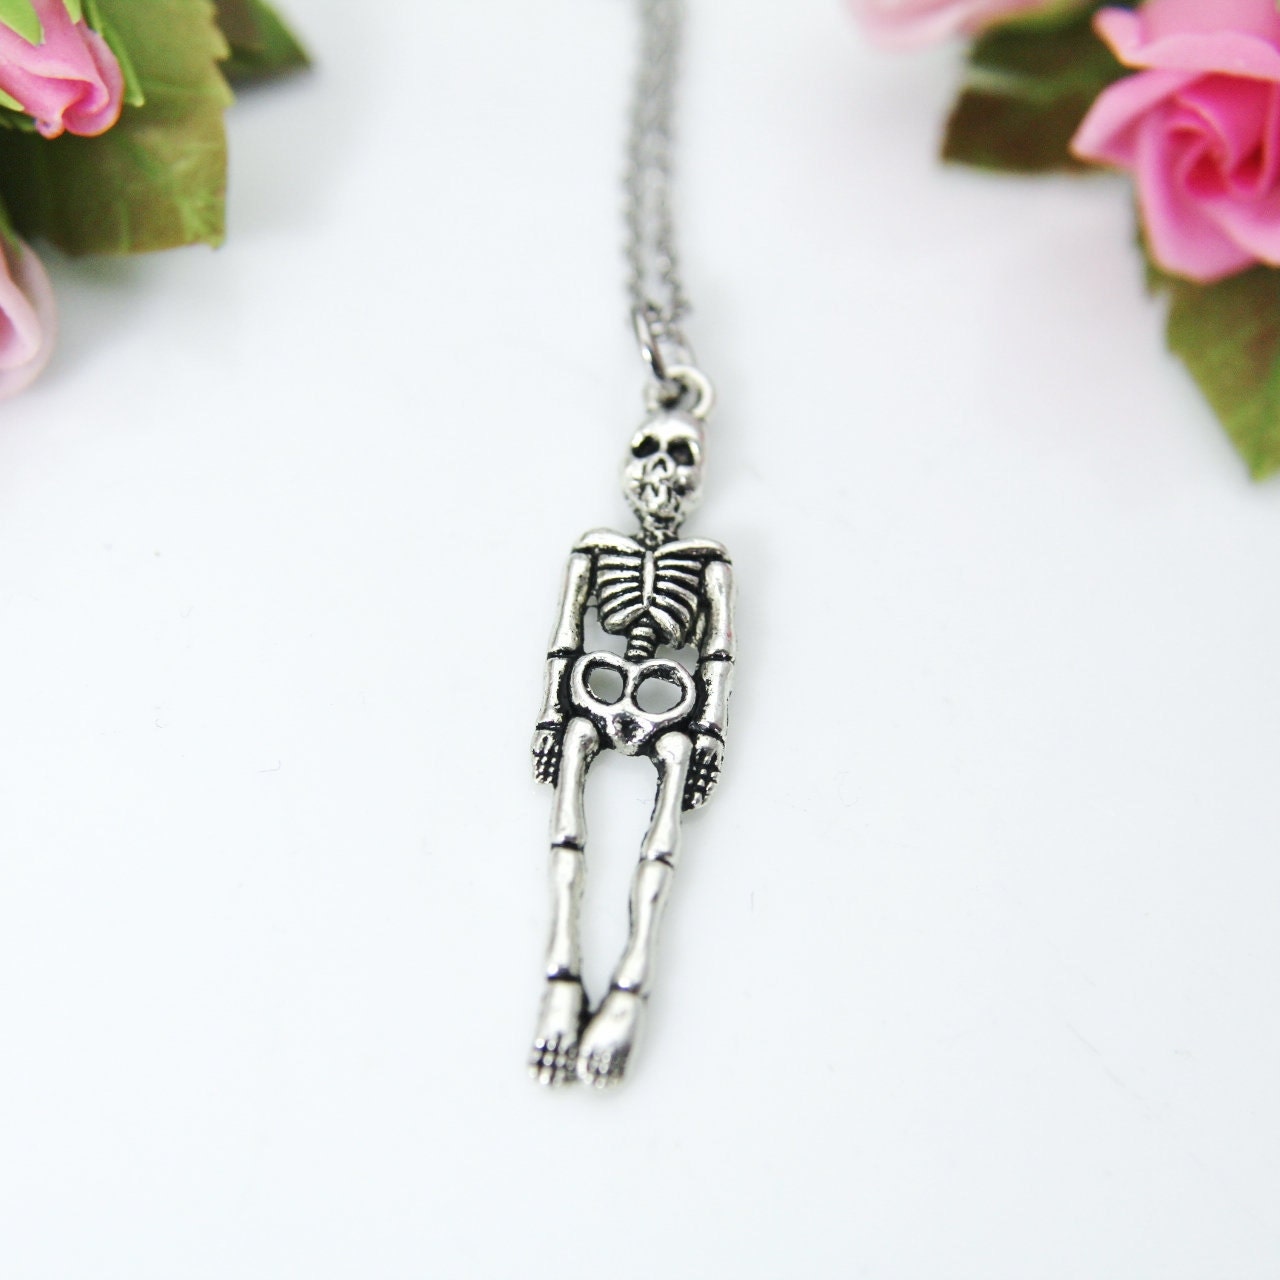 60 Jewelry Making Charms Human Skeleton Body Pendant DIY Doll Necklace Craft 